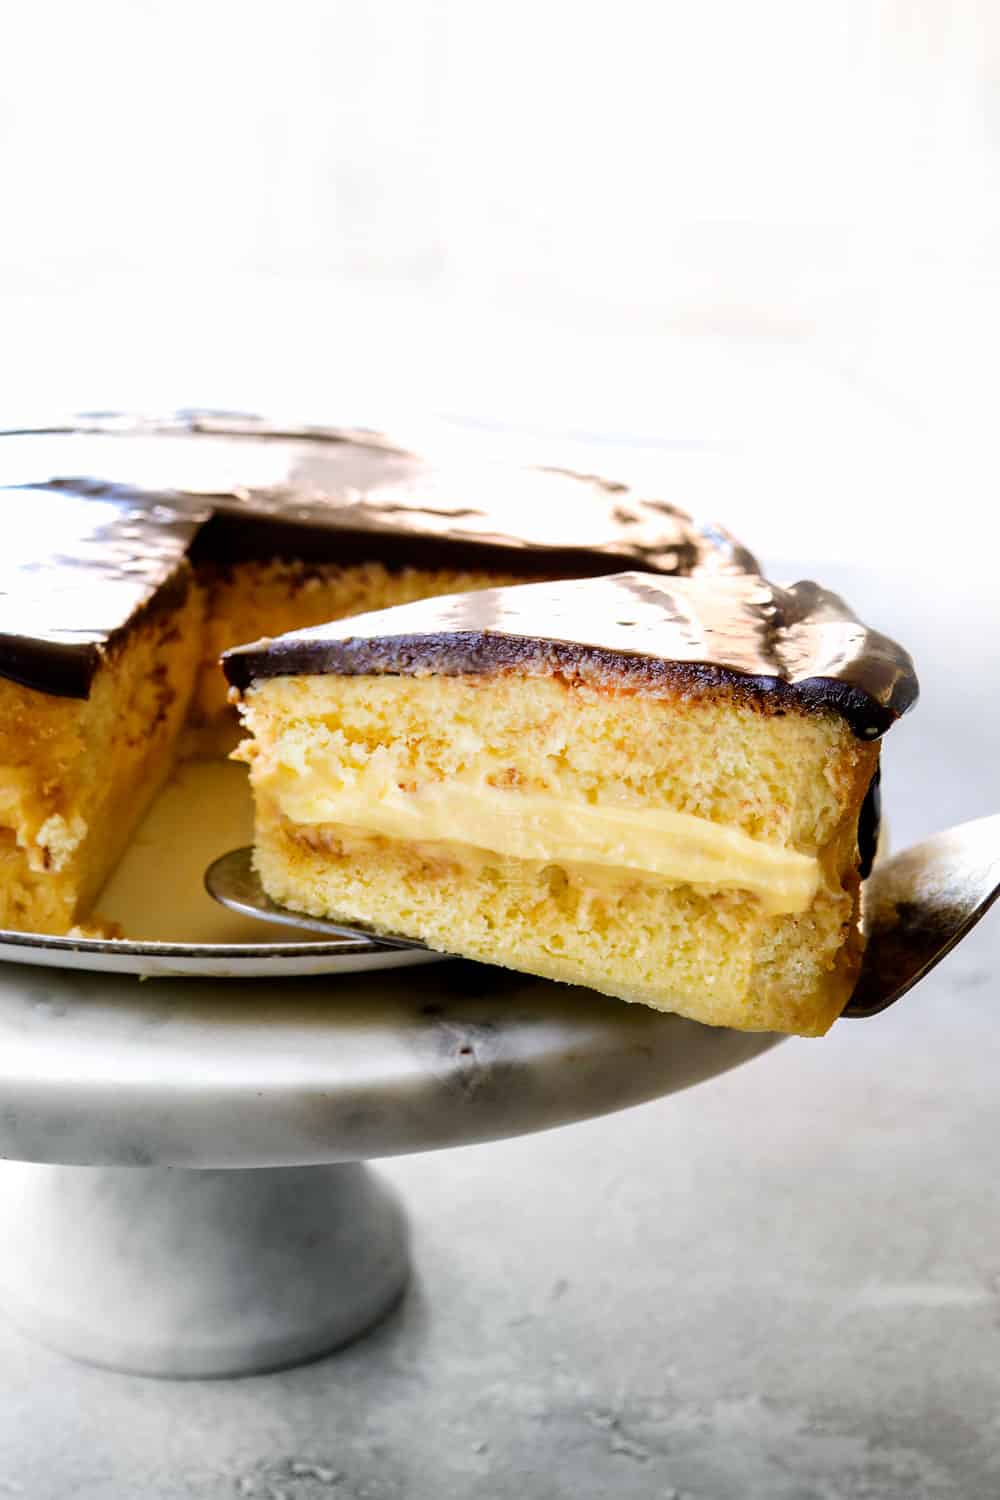 showing how to serve Boston Cream Pie by pulling a slice away from the cake